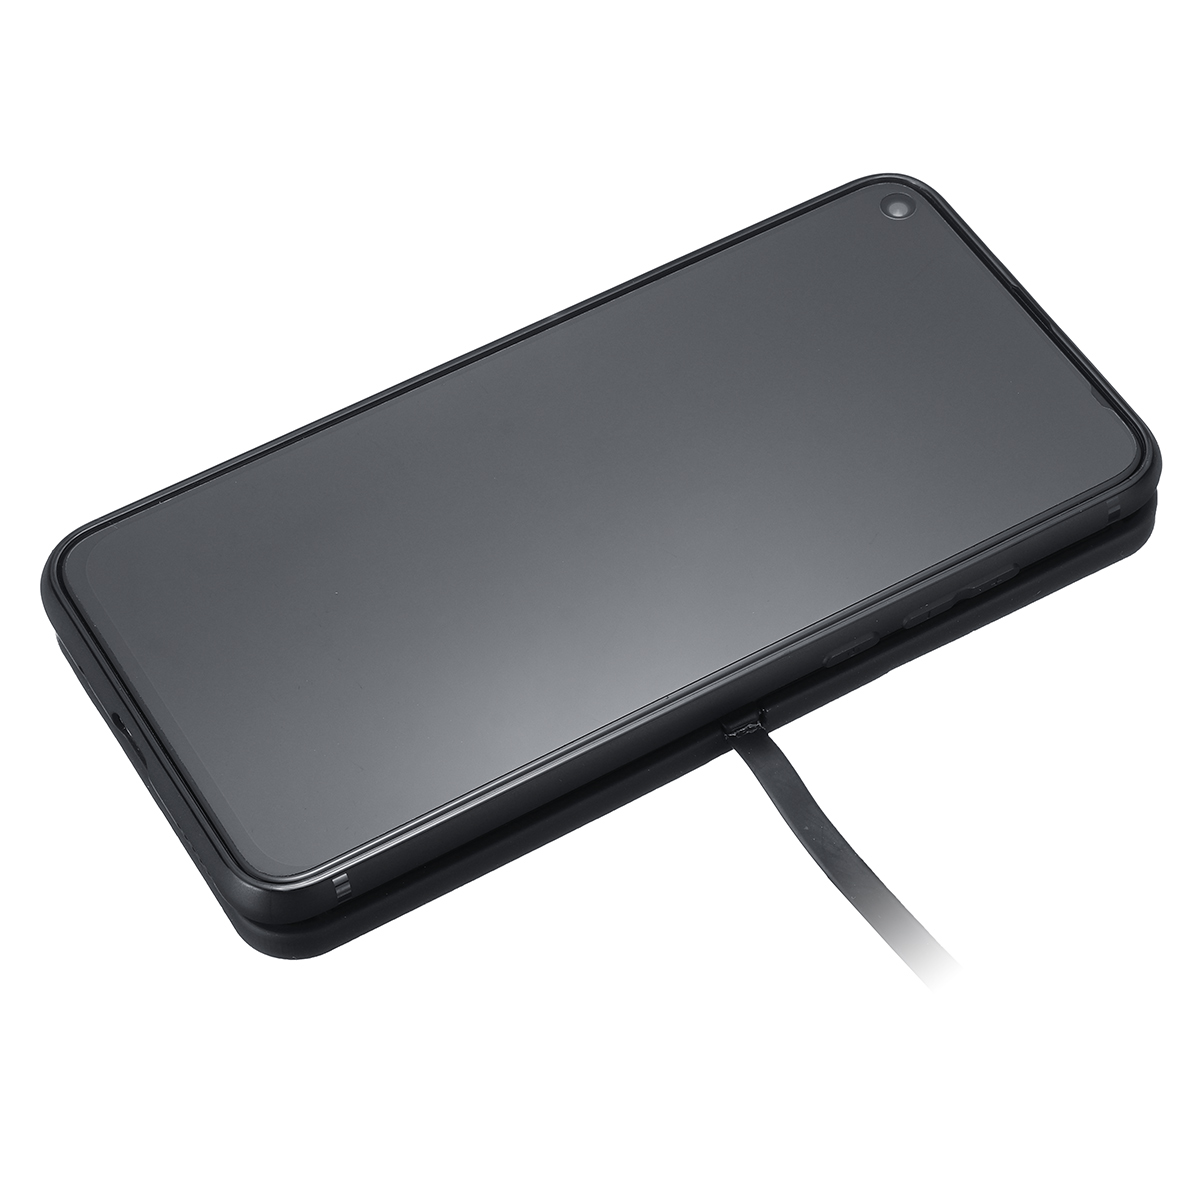 Car Qi Wireless Charger Pad with anti Skid Rubber Base